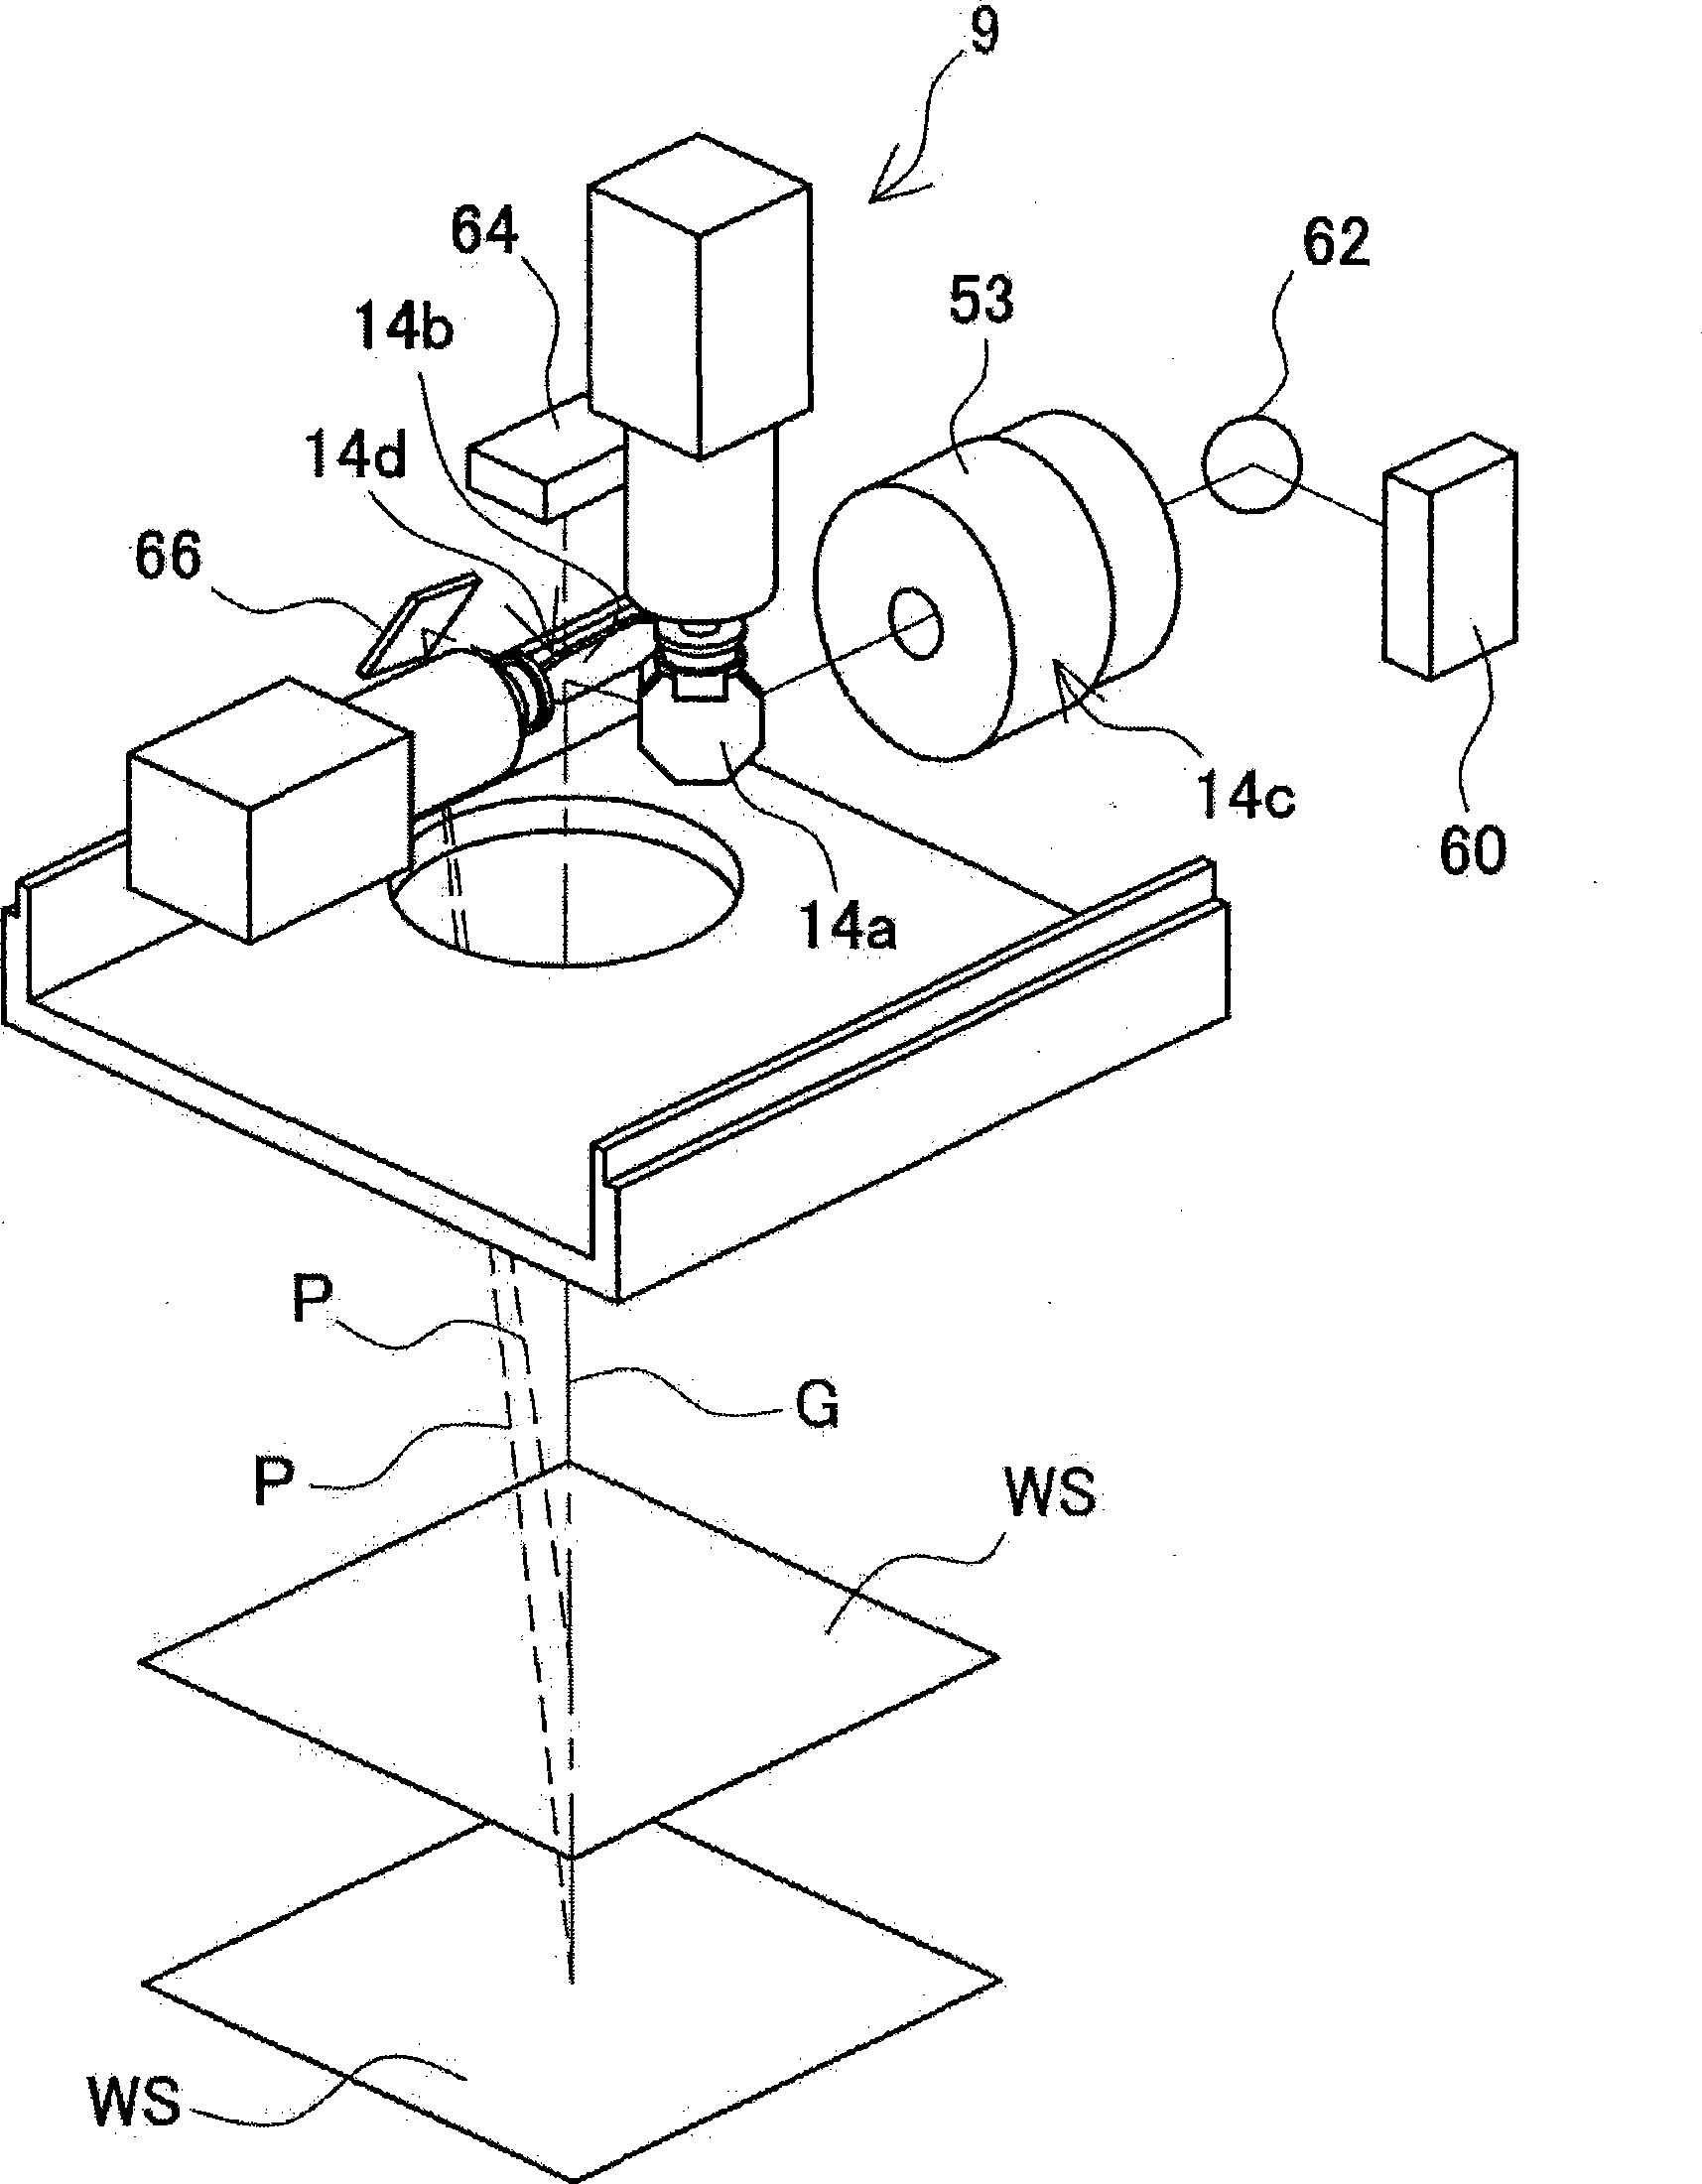 Laser processing apparatus, laser processing method, and method for making settings for laser processing apparatus